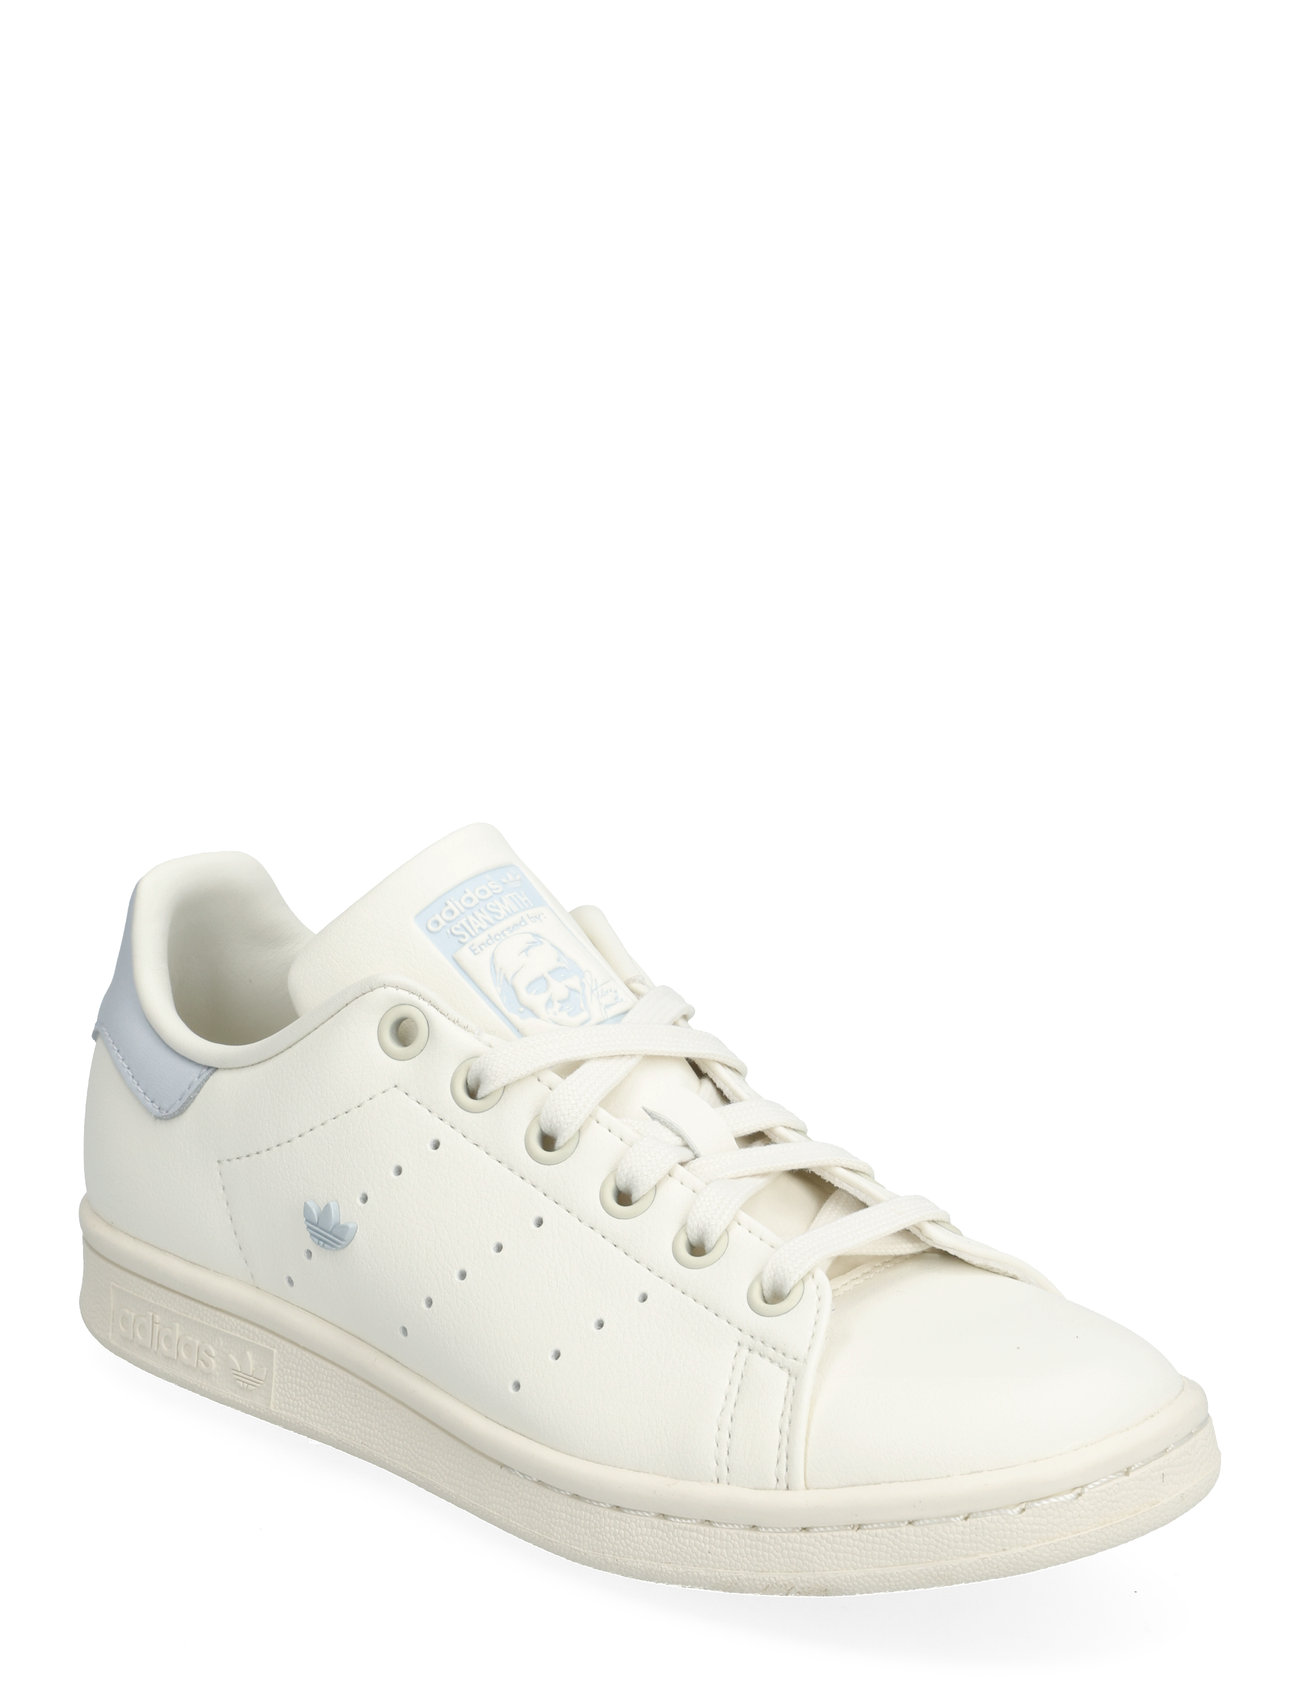 Stan Smith W Sport Sneakers Low-top Sneakers White Adidas Originals